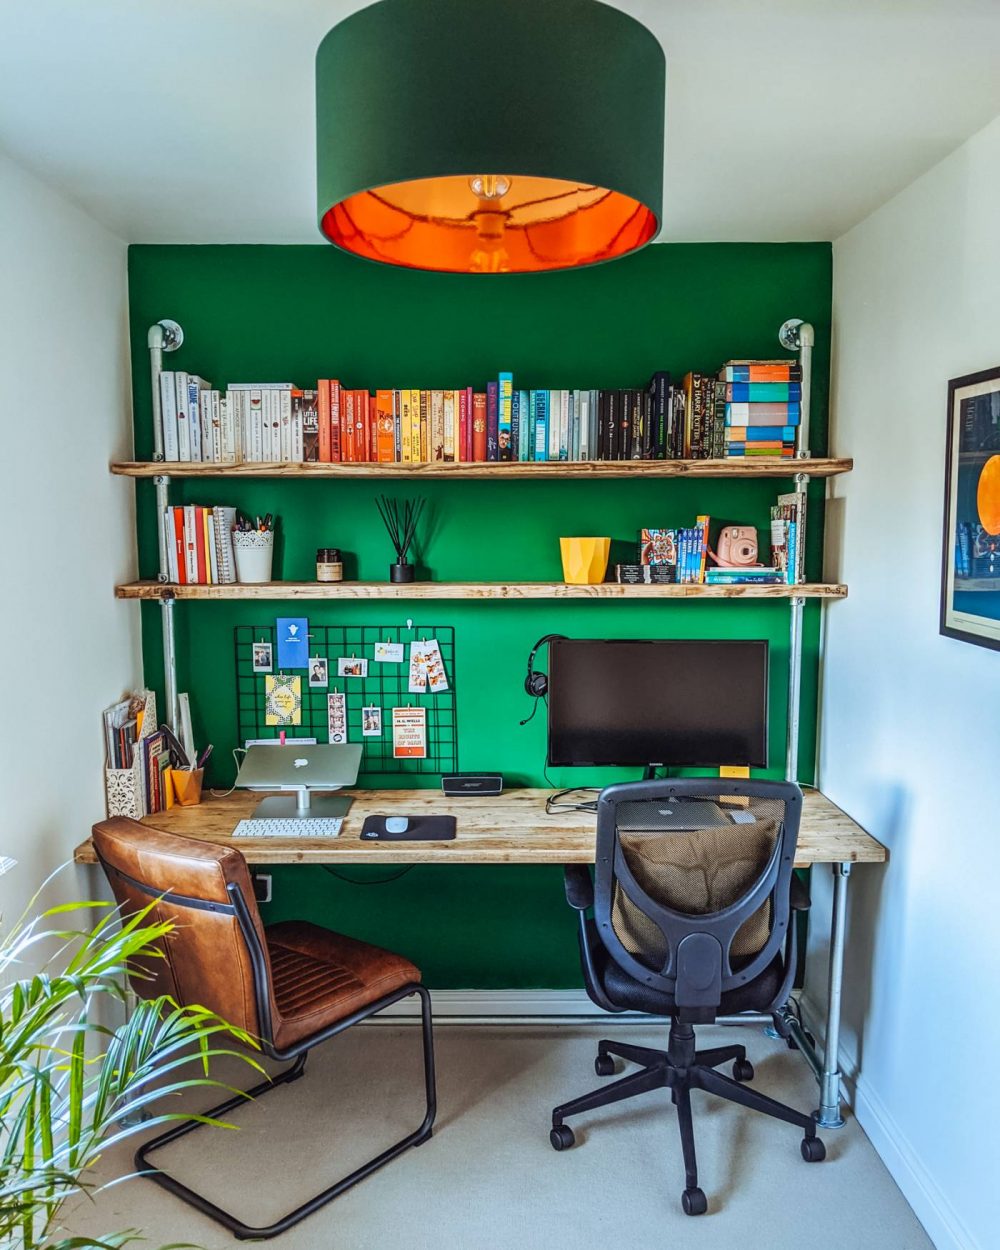 A custom wooden desk and shelving unit from Outhouse by Hand on a deep, forest green wall.